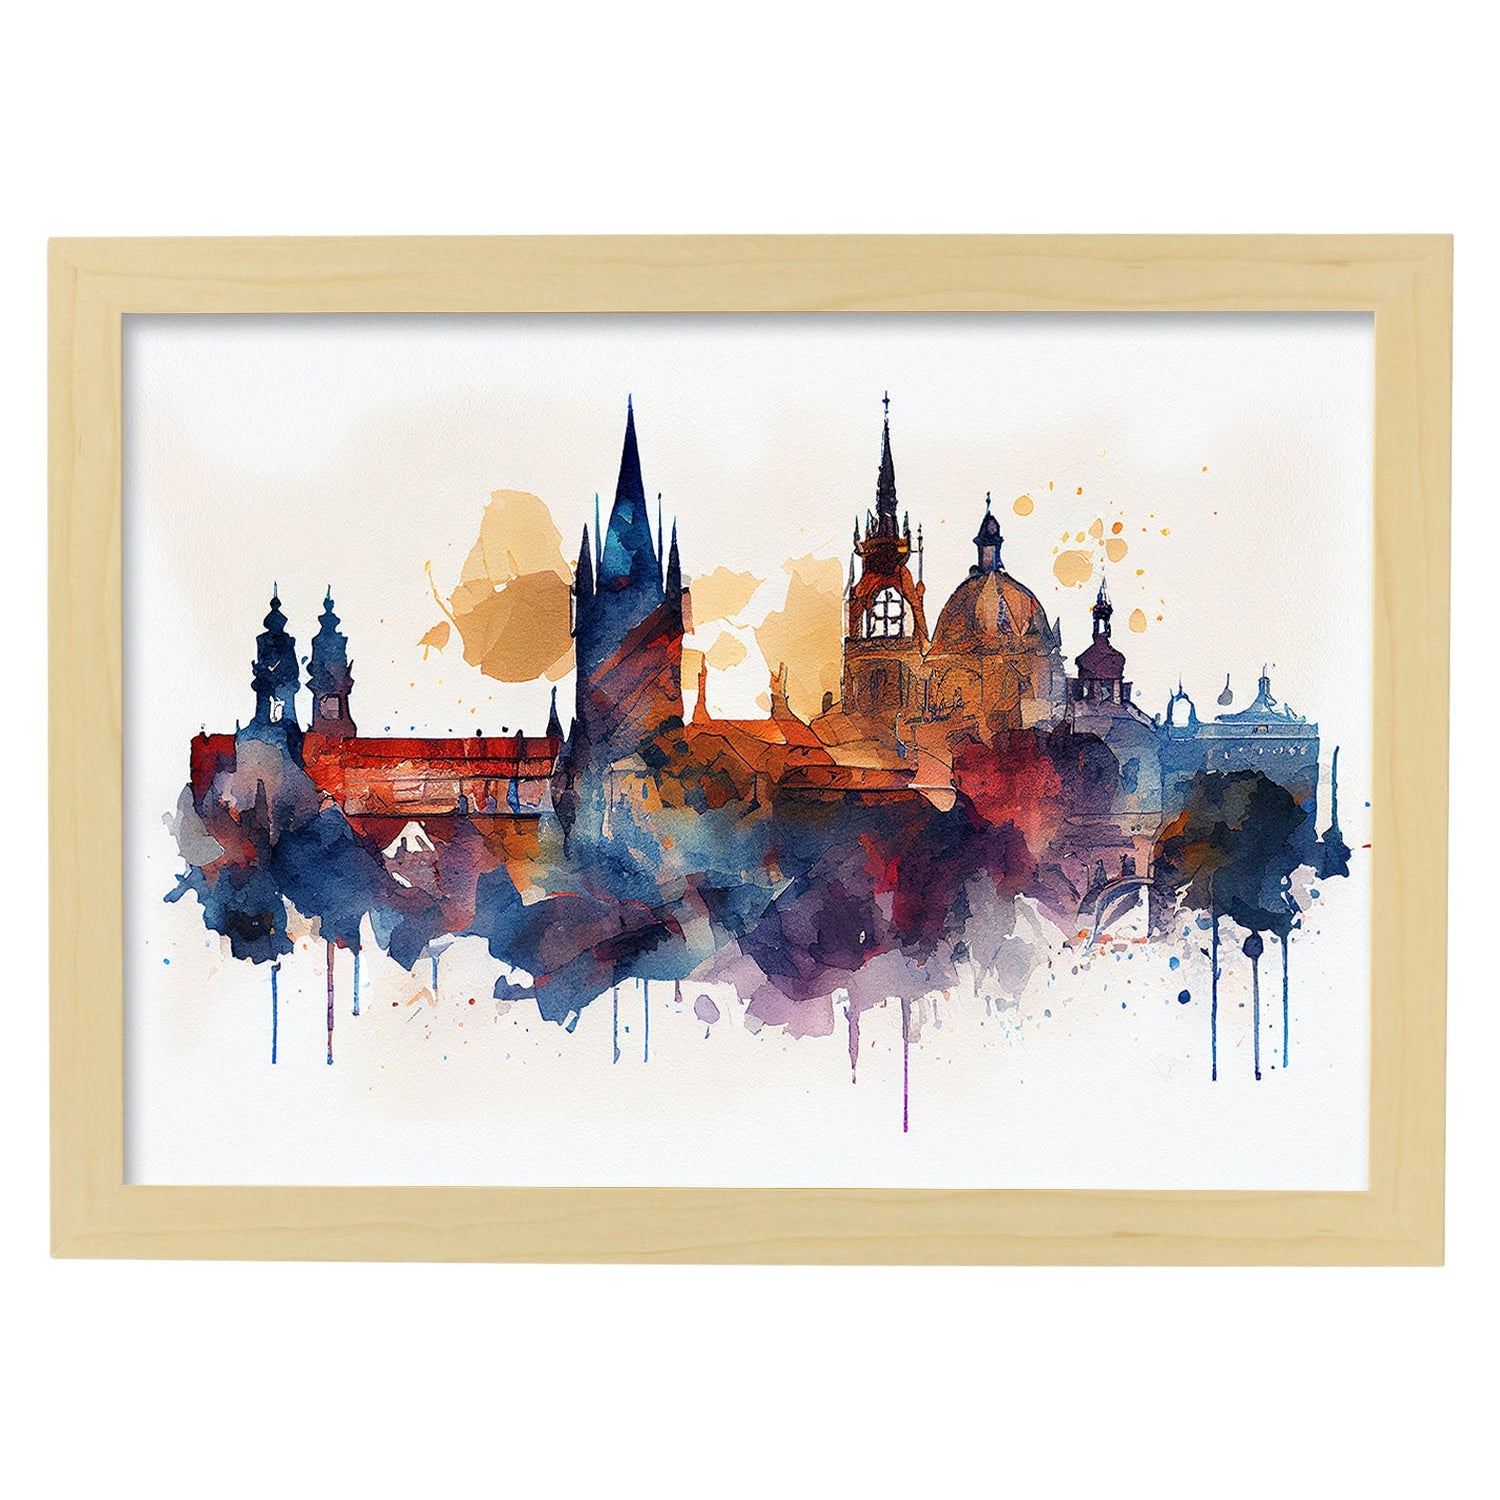 Nacnic watercolor of a skyline of the city of Prague_2. Aesthetic Wall Art Prints for Bedroom or Living Room Design.-Artwork-Nacnic-A4-Marco Madera Clara-Nacnic Estudio SL